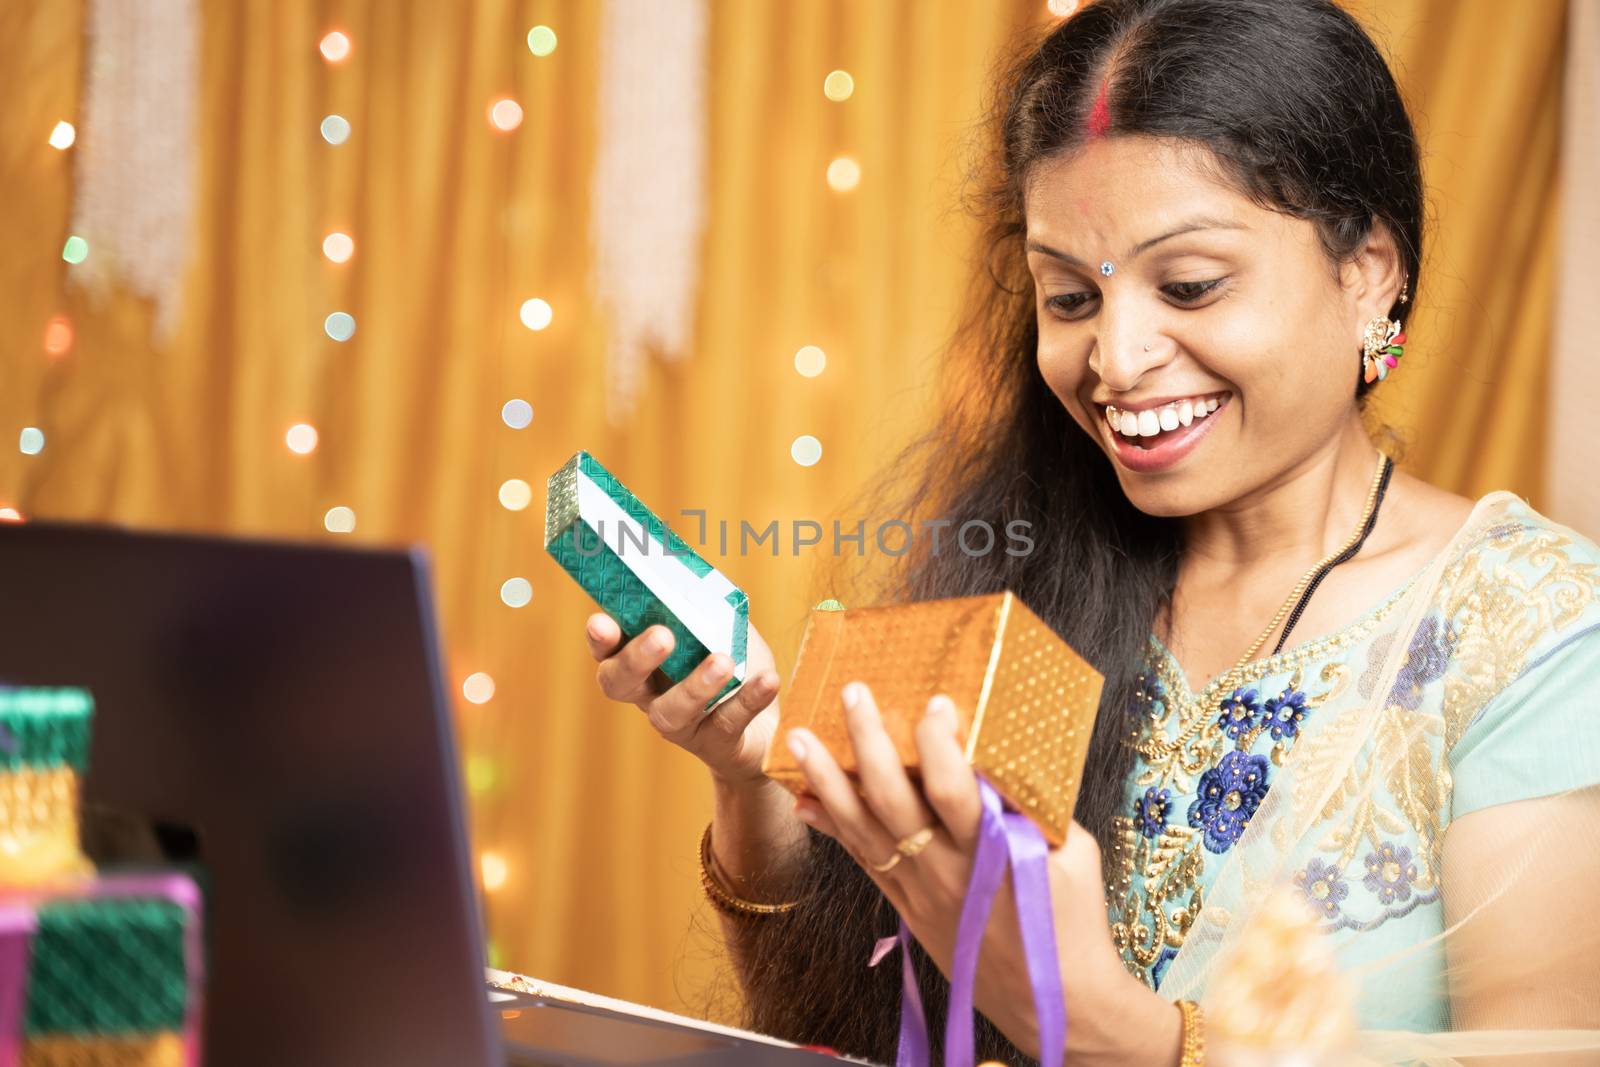 Happy excited Woman opening gift infront of laptop during video call or chat at Raksha Bandhan festival ceremony - Concept of distance relations, celebrations and lifestyle. by lakshmiprasad.maski@gmai.com